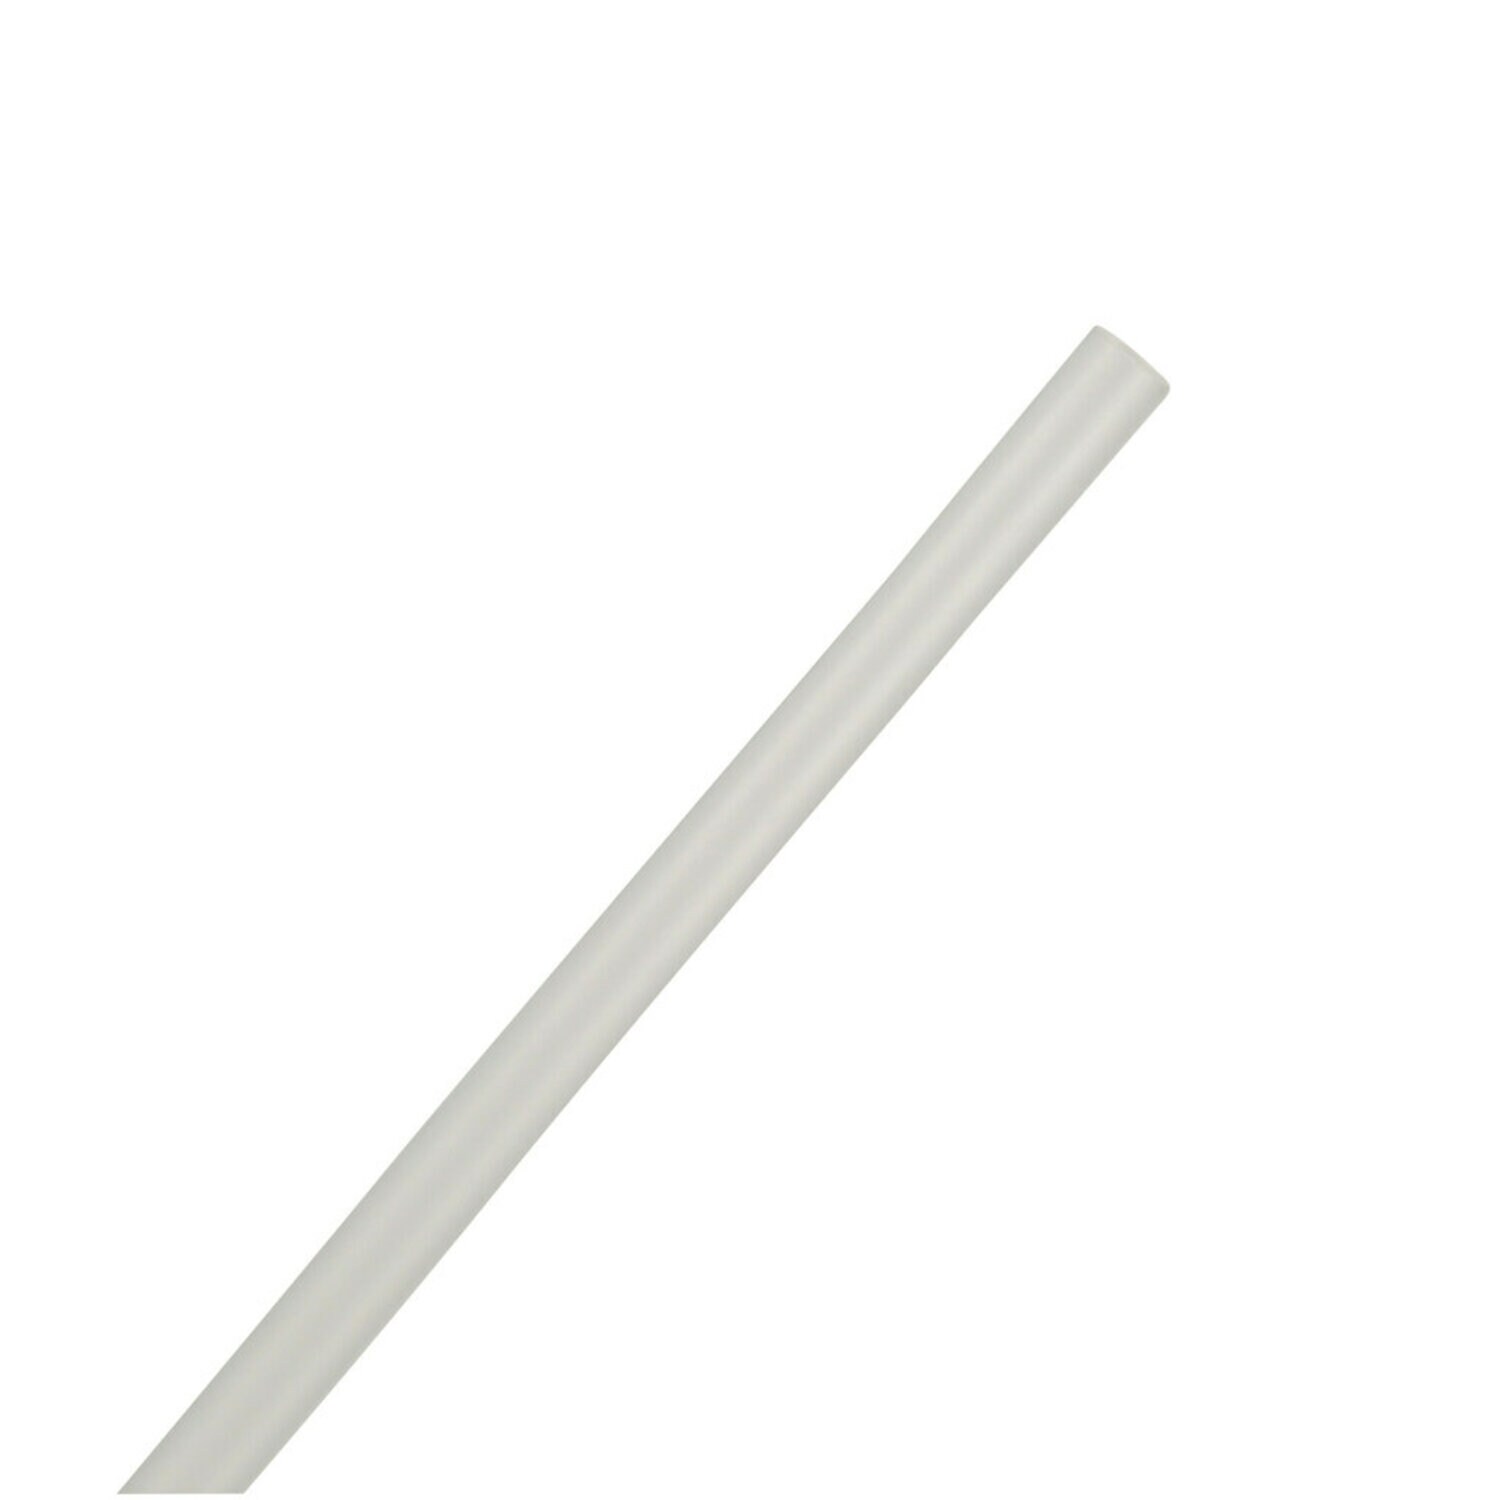 7000133496 - 3M Heat Shrink Thin-Wall Tubing FP-301-1/4-48"-Clear-12 Pcs, 48 in
Length sticks, 12 pieces/case